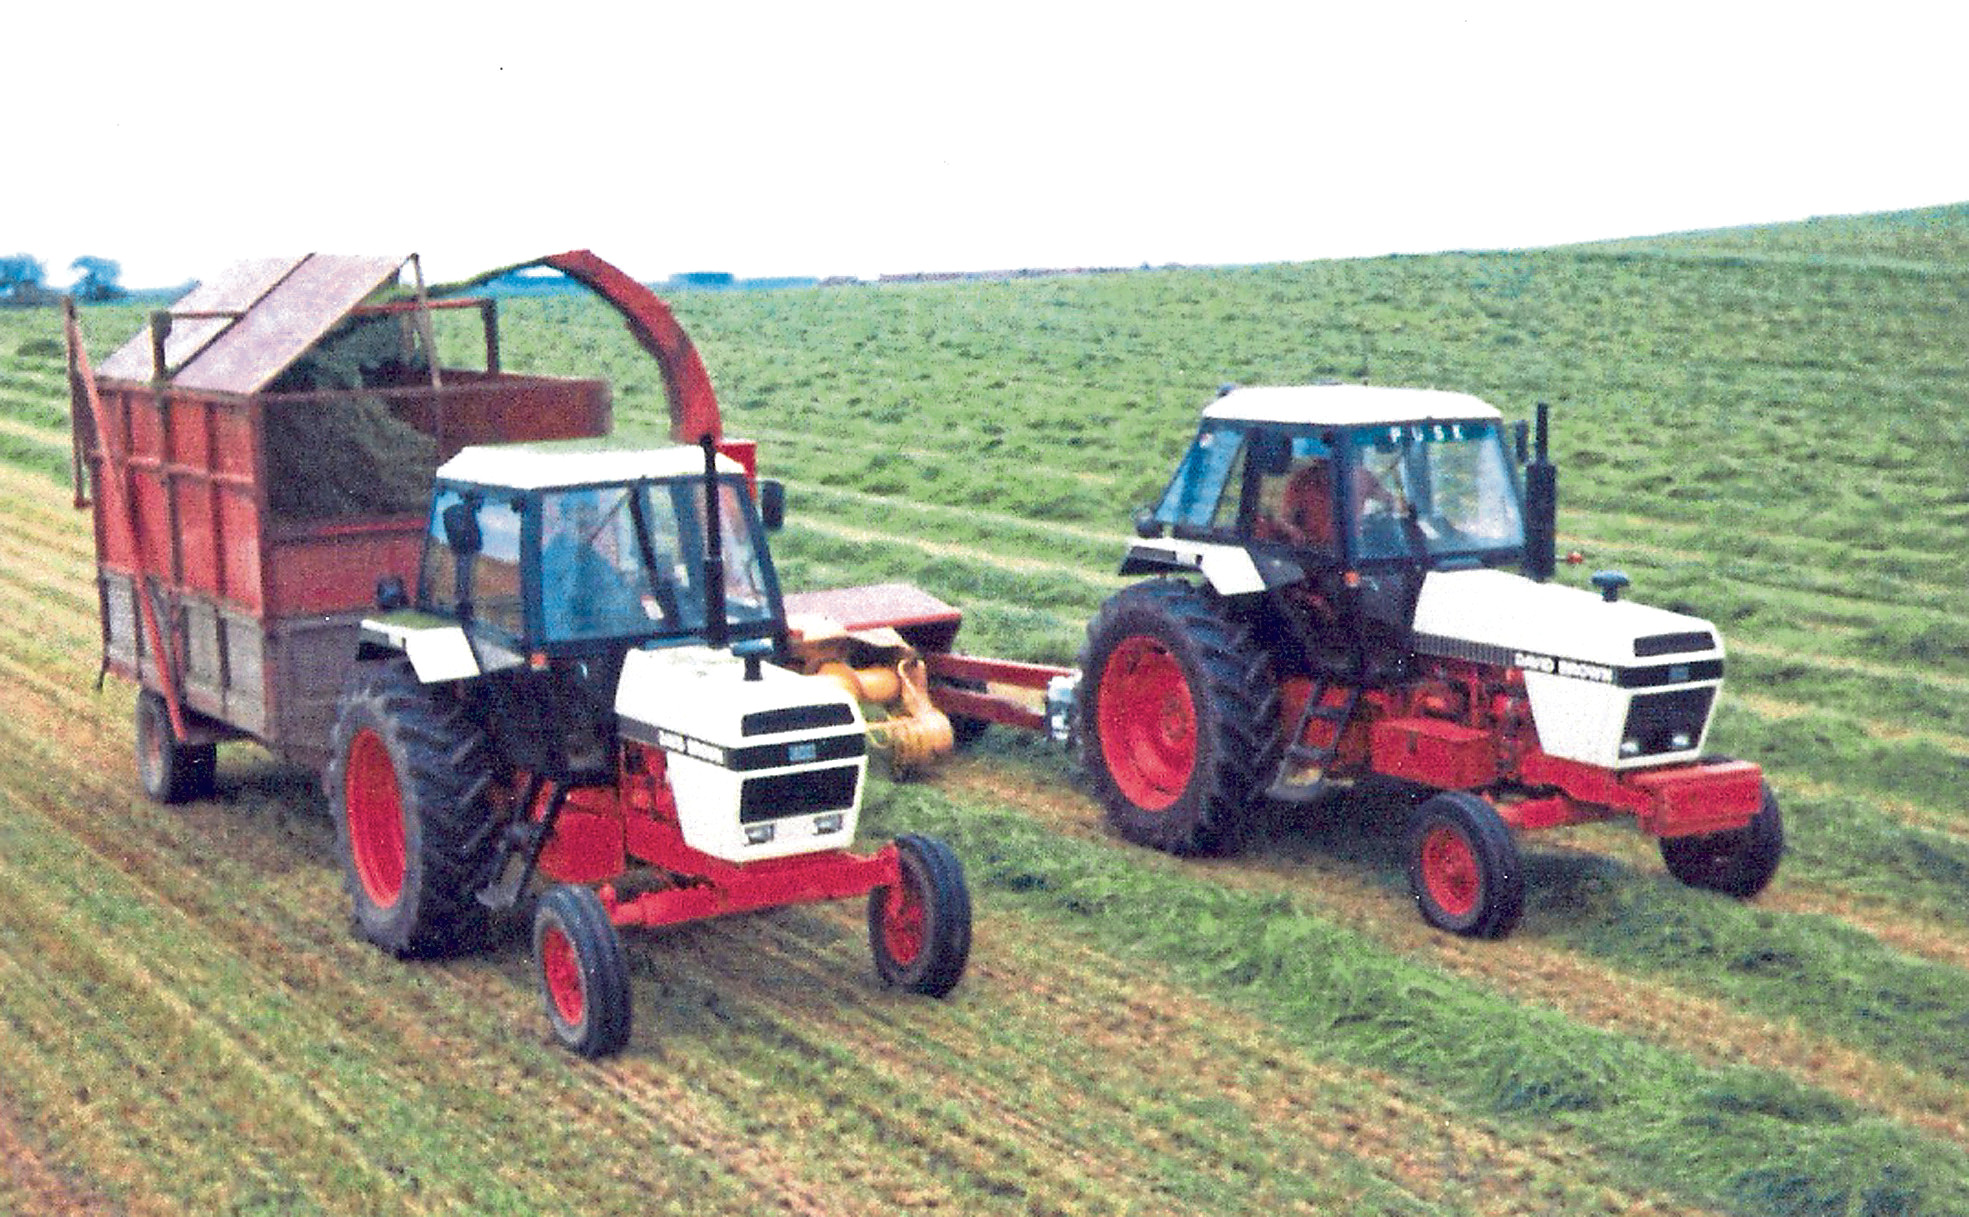 Two 90 series tractors, a 1690 on the forage harvester and a 1490 on the trailer work hard at lifting the silage crop in the 1980s.